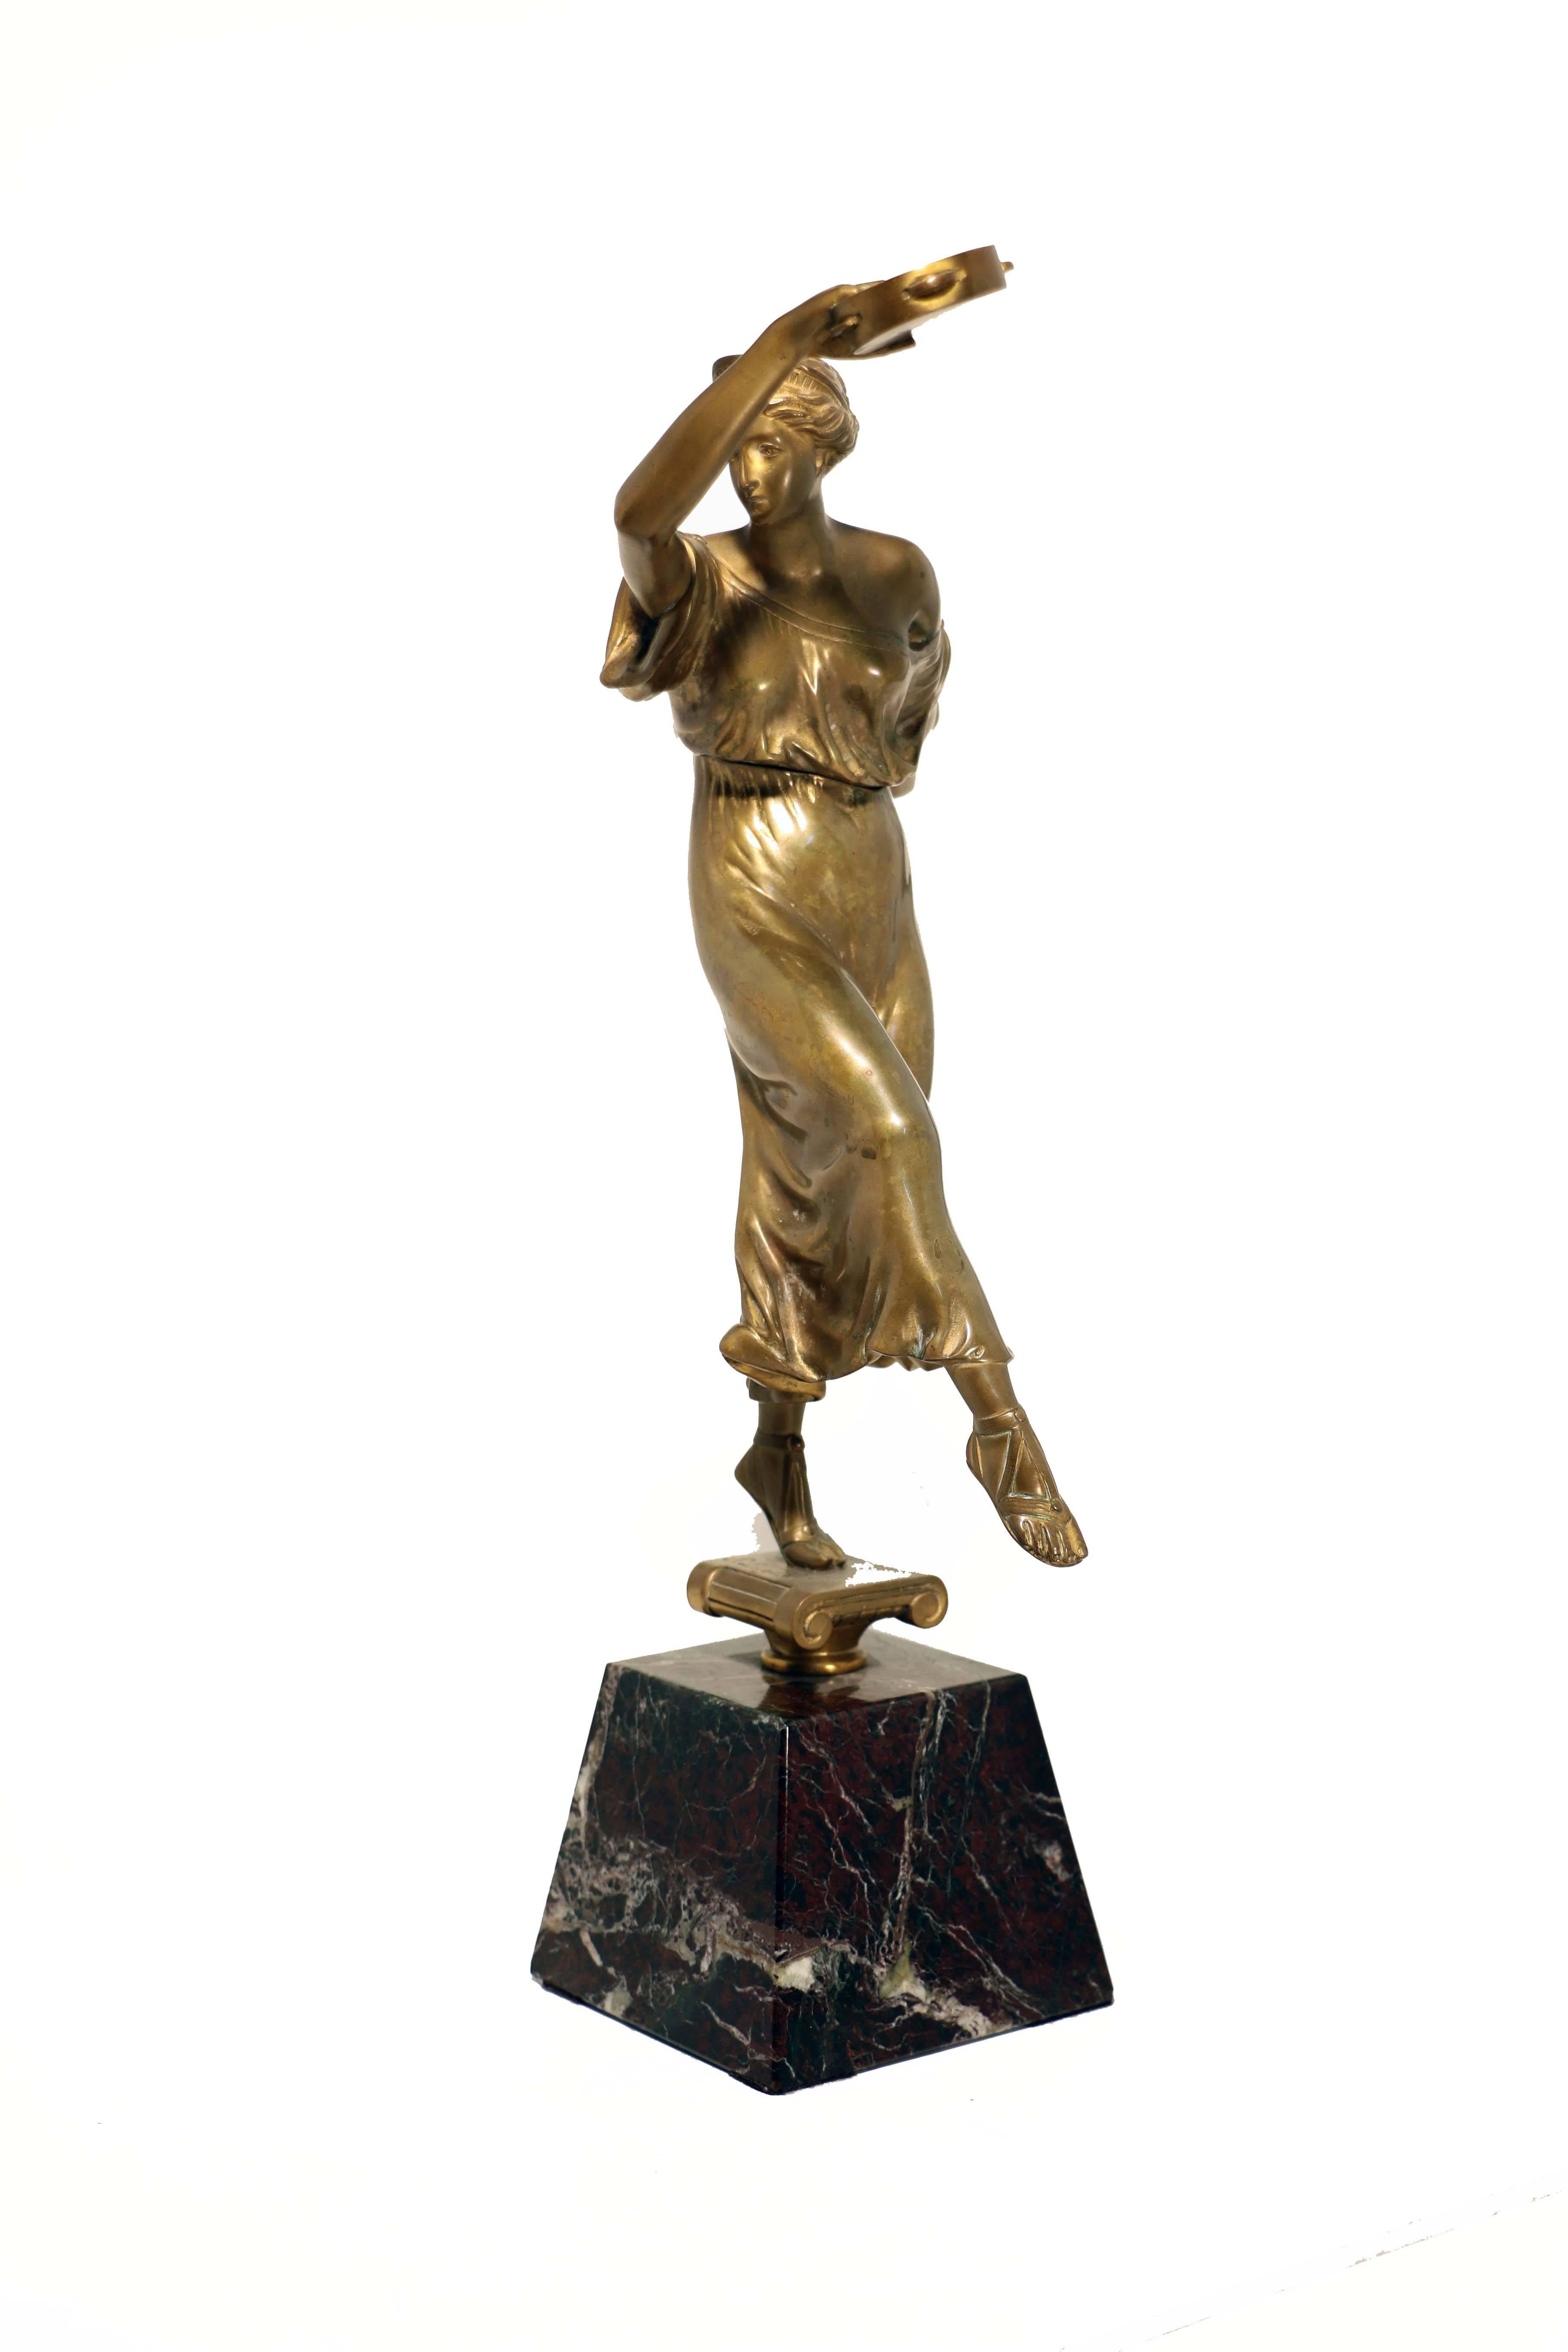 An antique gilt bronze figure of a dancer, after the antique.

The young woman is dressed in a clinging gown and raised on one sandaled foot, her arms hold up two tambourines with which she accompanies her dance. This sensual figure may perhaps be